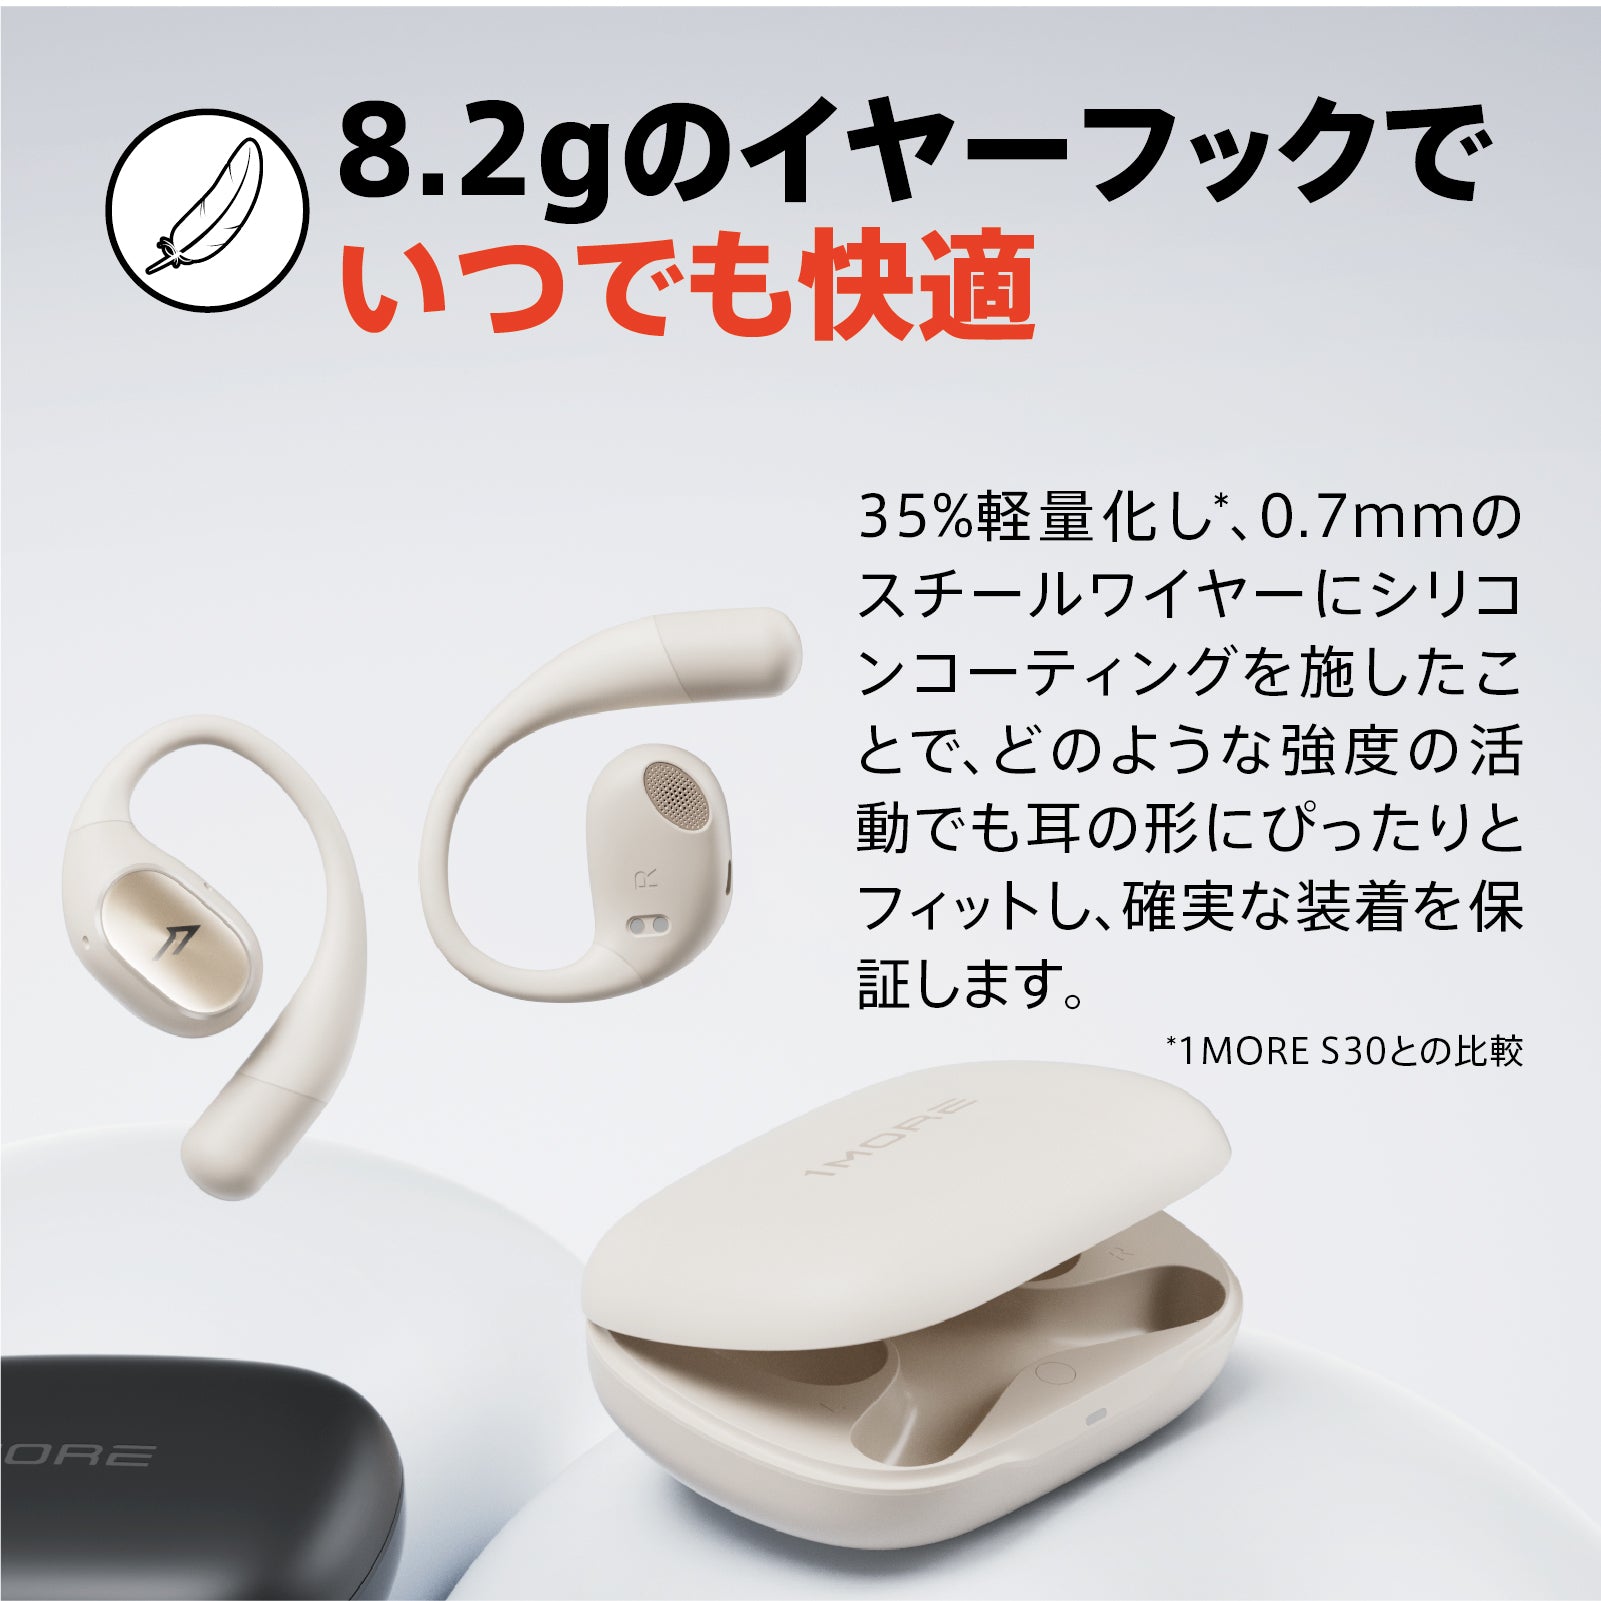 【15％OFF】1MORE Open Earbuds S31 オープンイヤーイヤホン